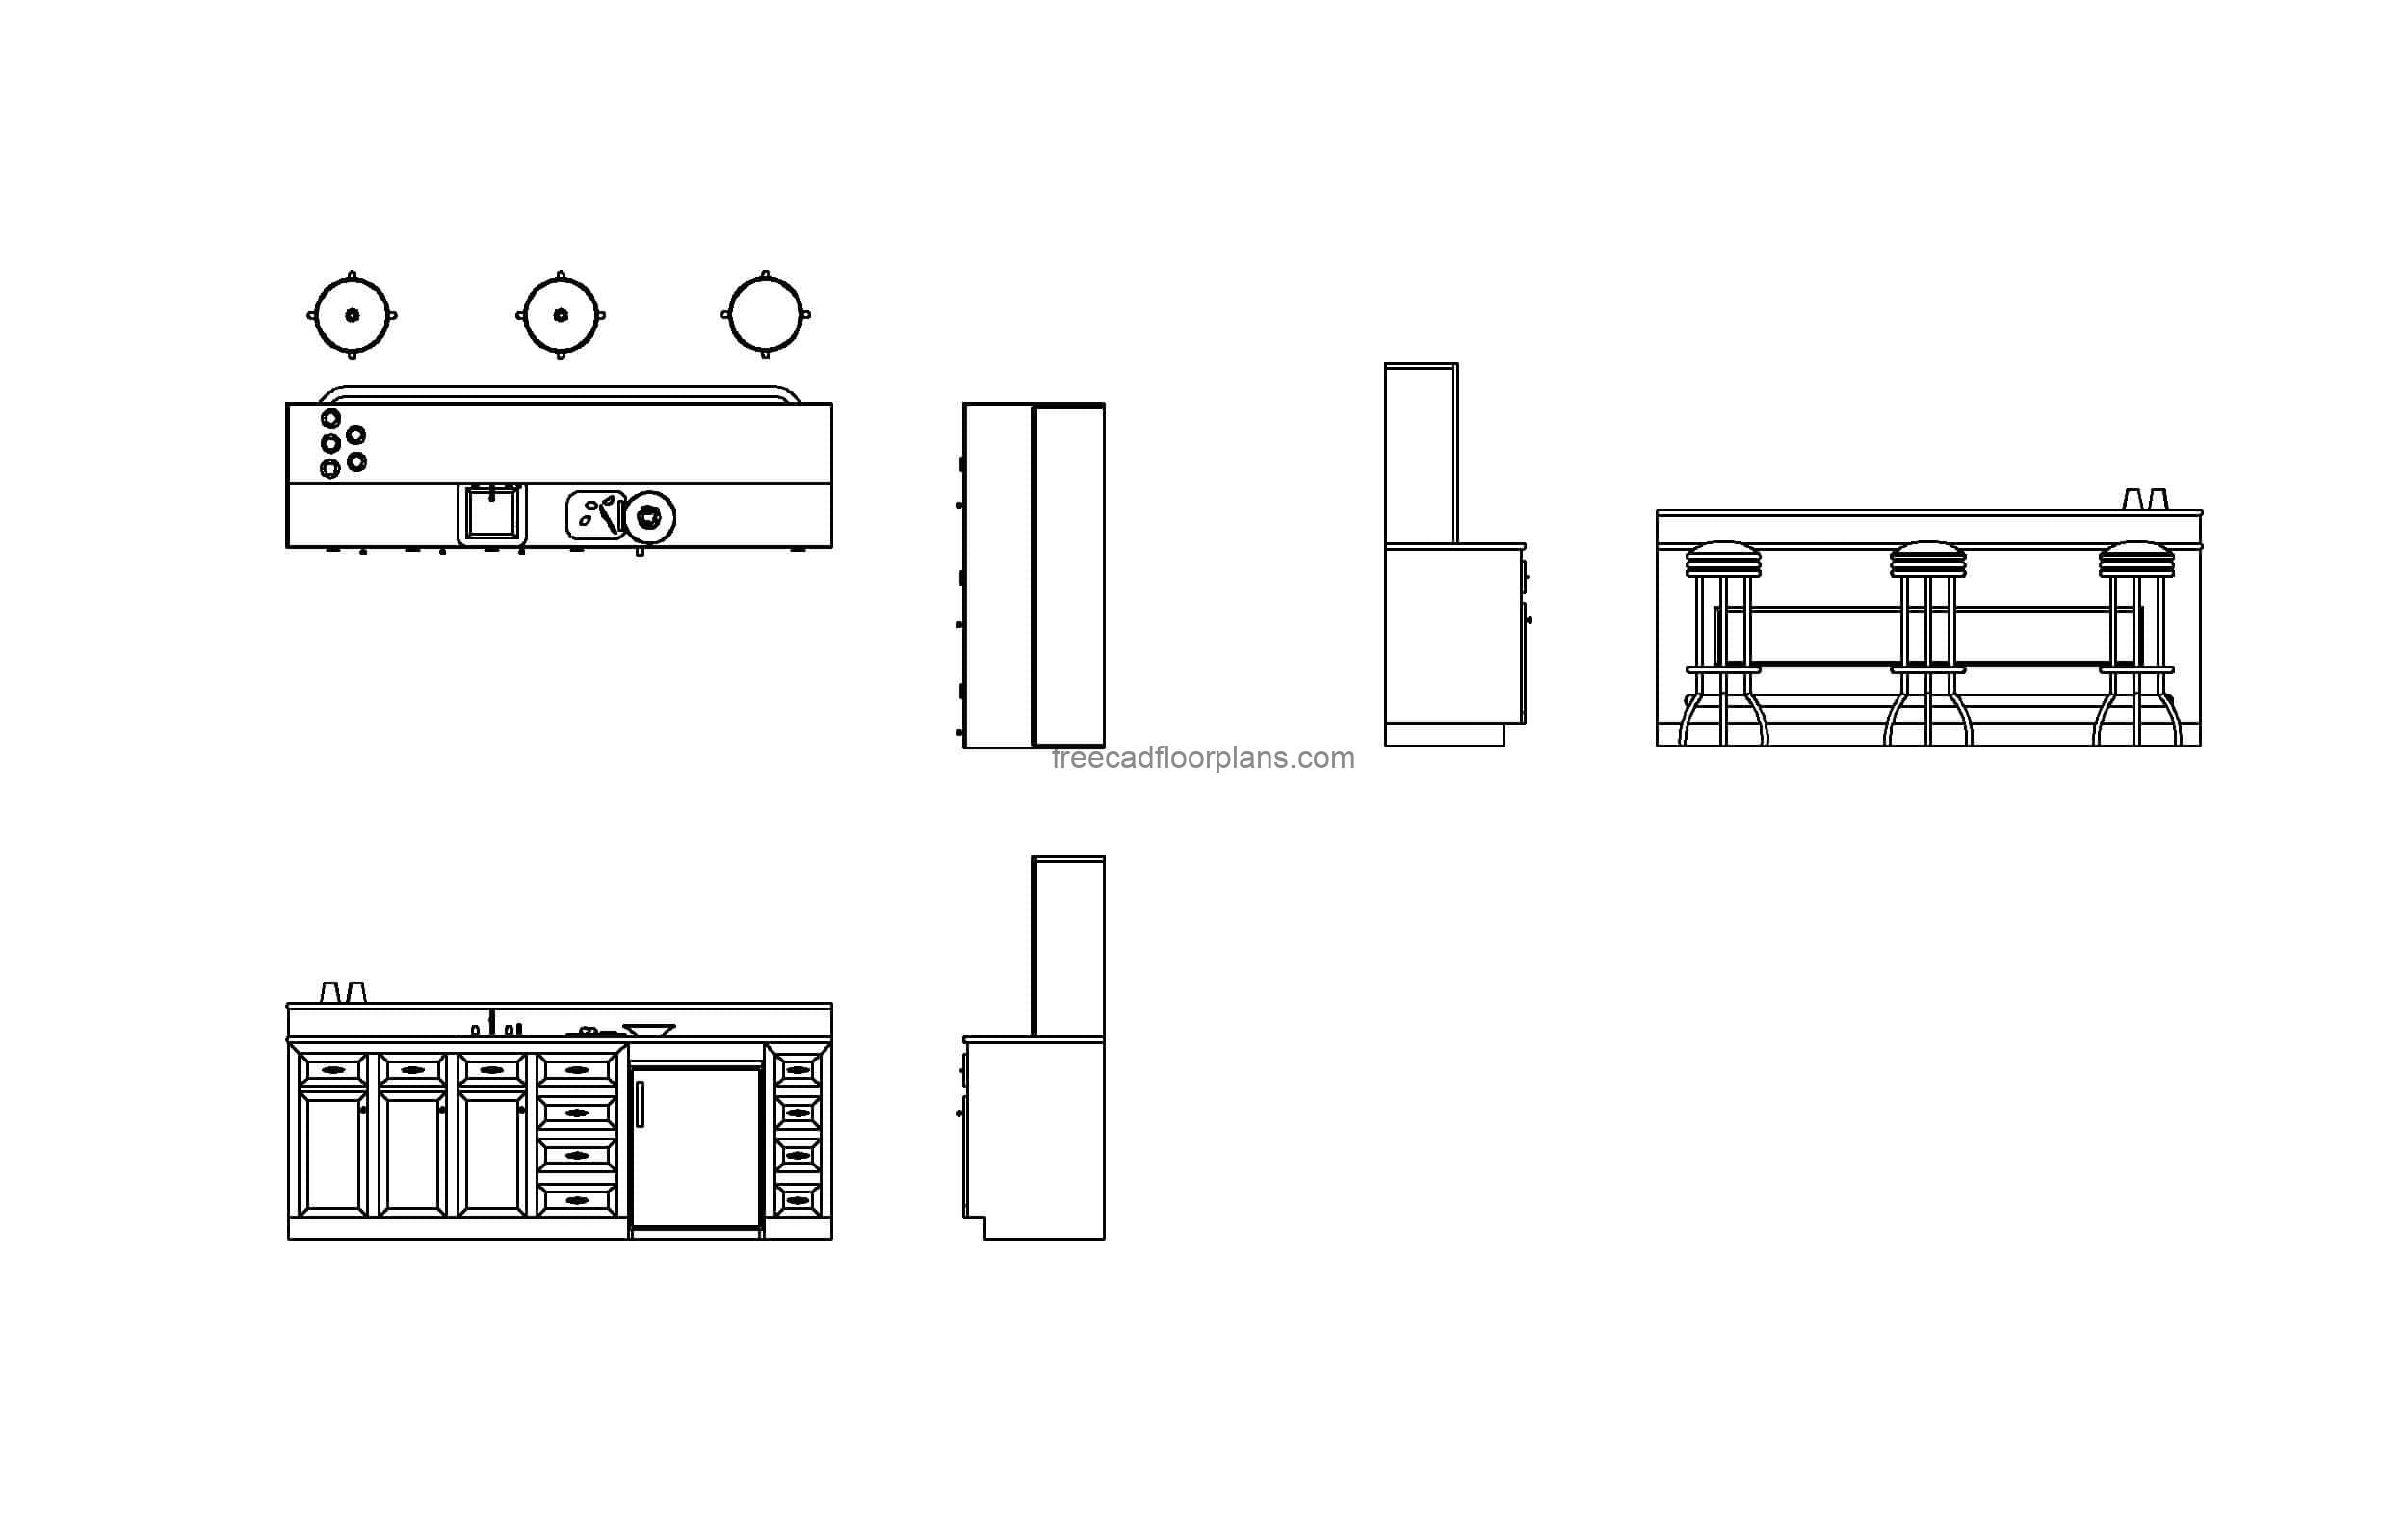 autocad drawing of a mini bar, plan and elevation 2d views dwg file free for download